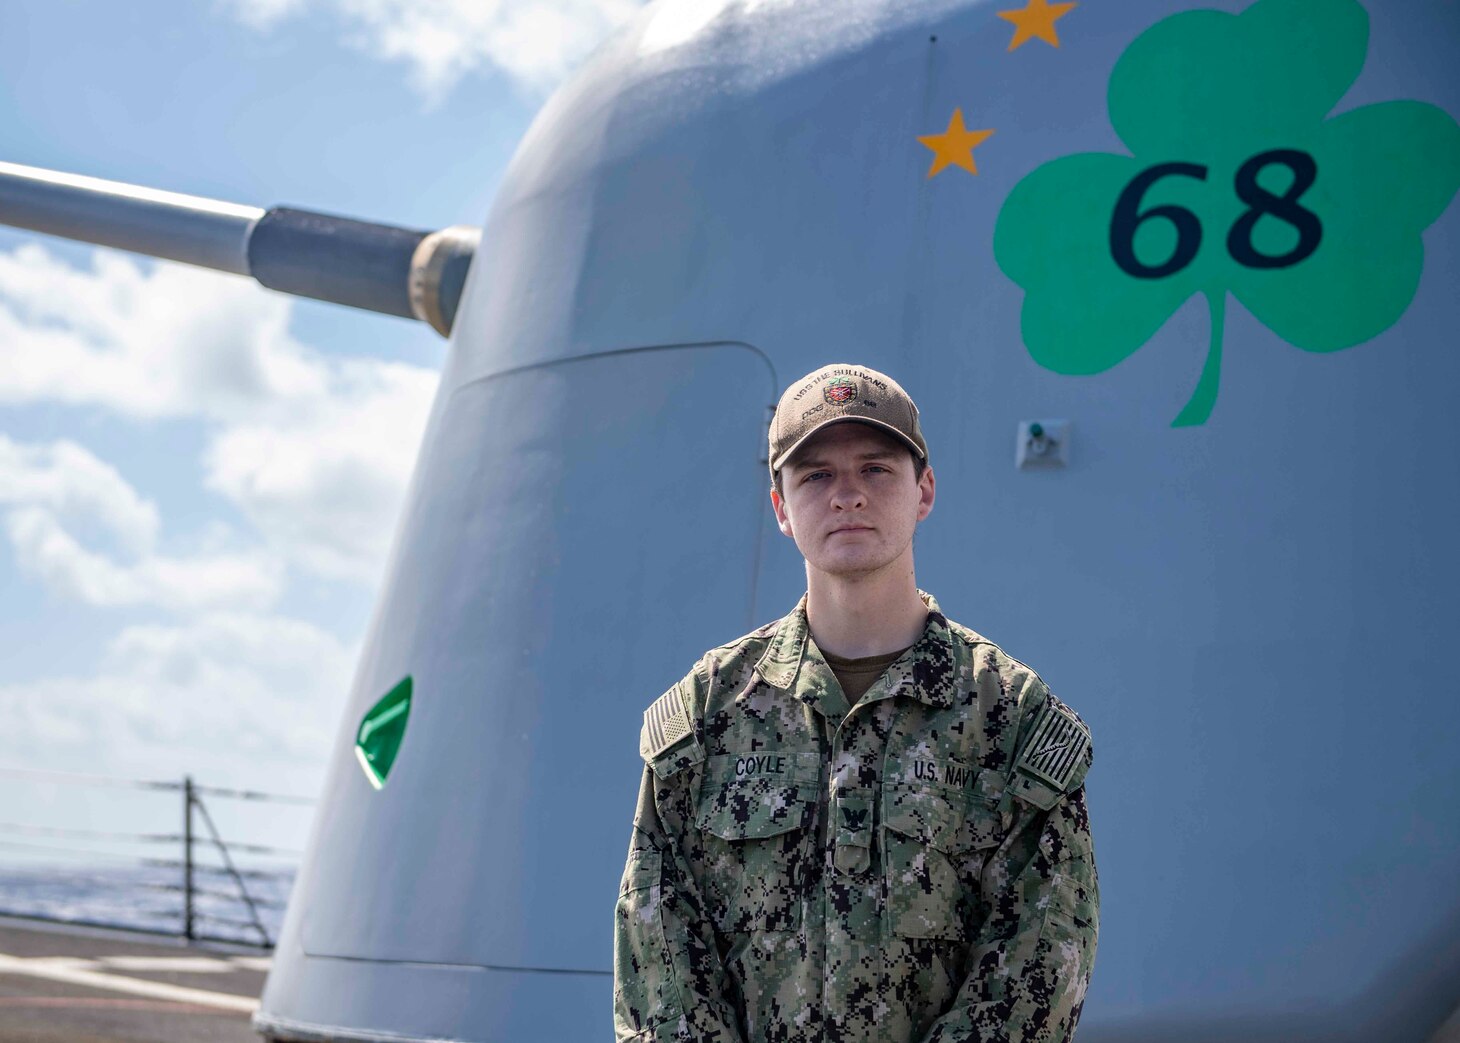 Information Systems Technician 3rd Class Matthew Coyle, poses for a portrait on the foc'sle of the guided-missile destroyer USS The Sullivans (DDG 68). (U.S. Navy photo by Ens. Kelly Harris)